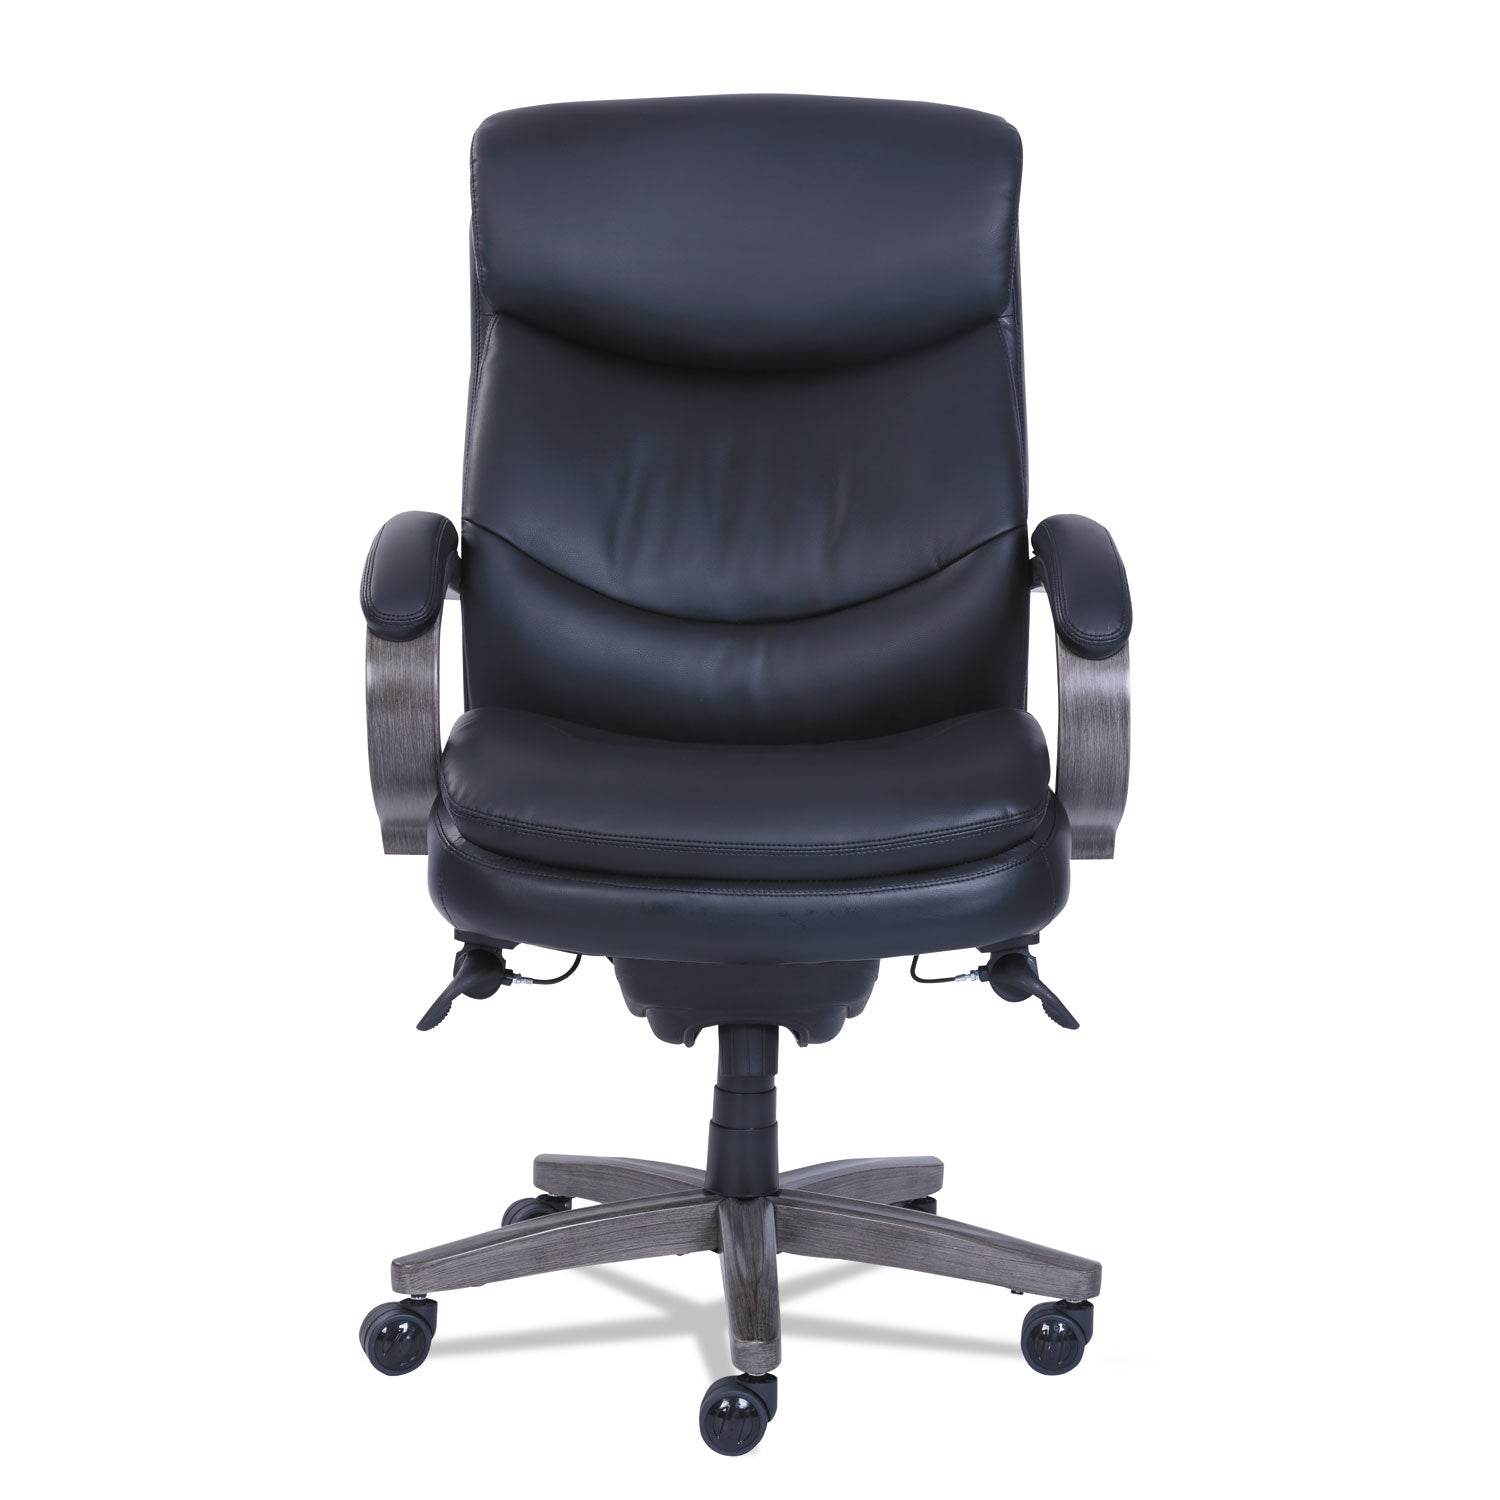 woodbury-high-back-executive-chair-supports-up-to-300-lb-2025-to-2325-seat-height-black-seat-back-weathered-gray-base_lzb48962a - 2